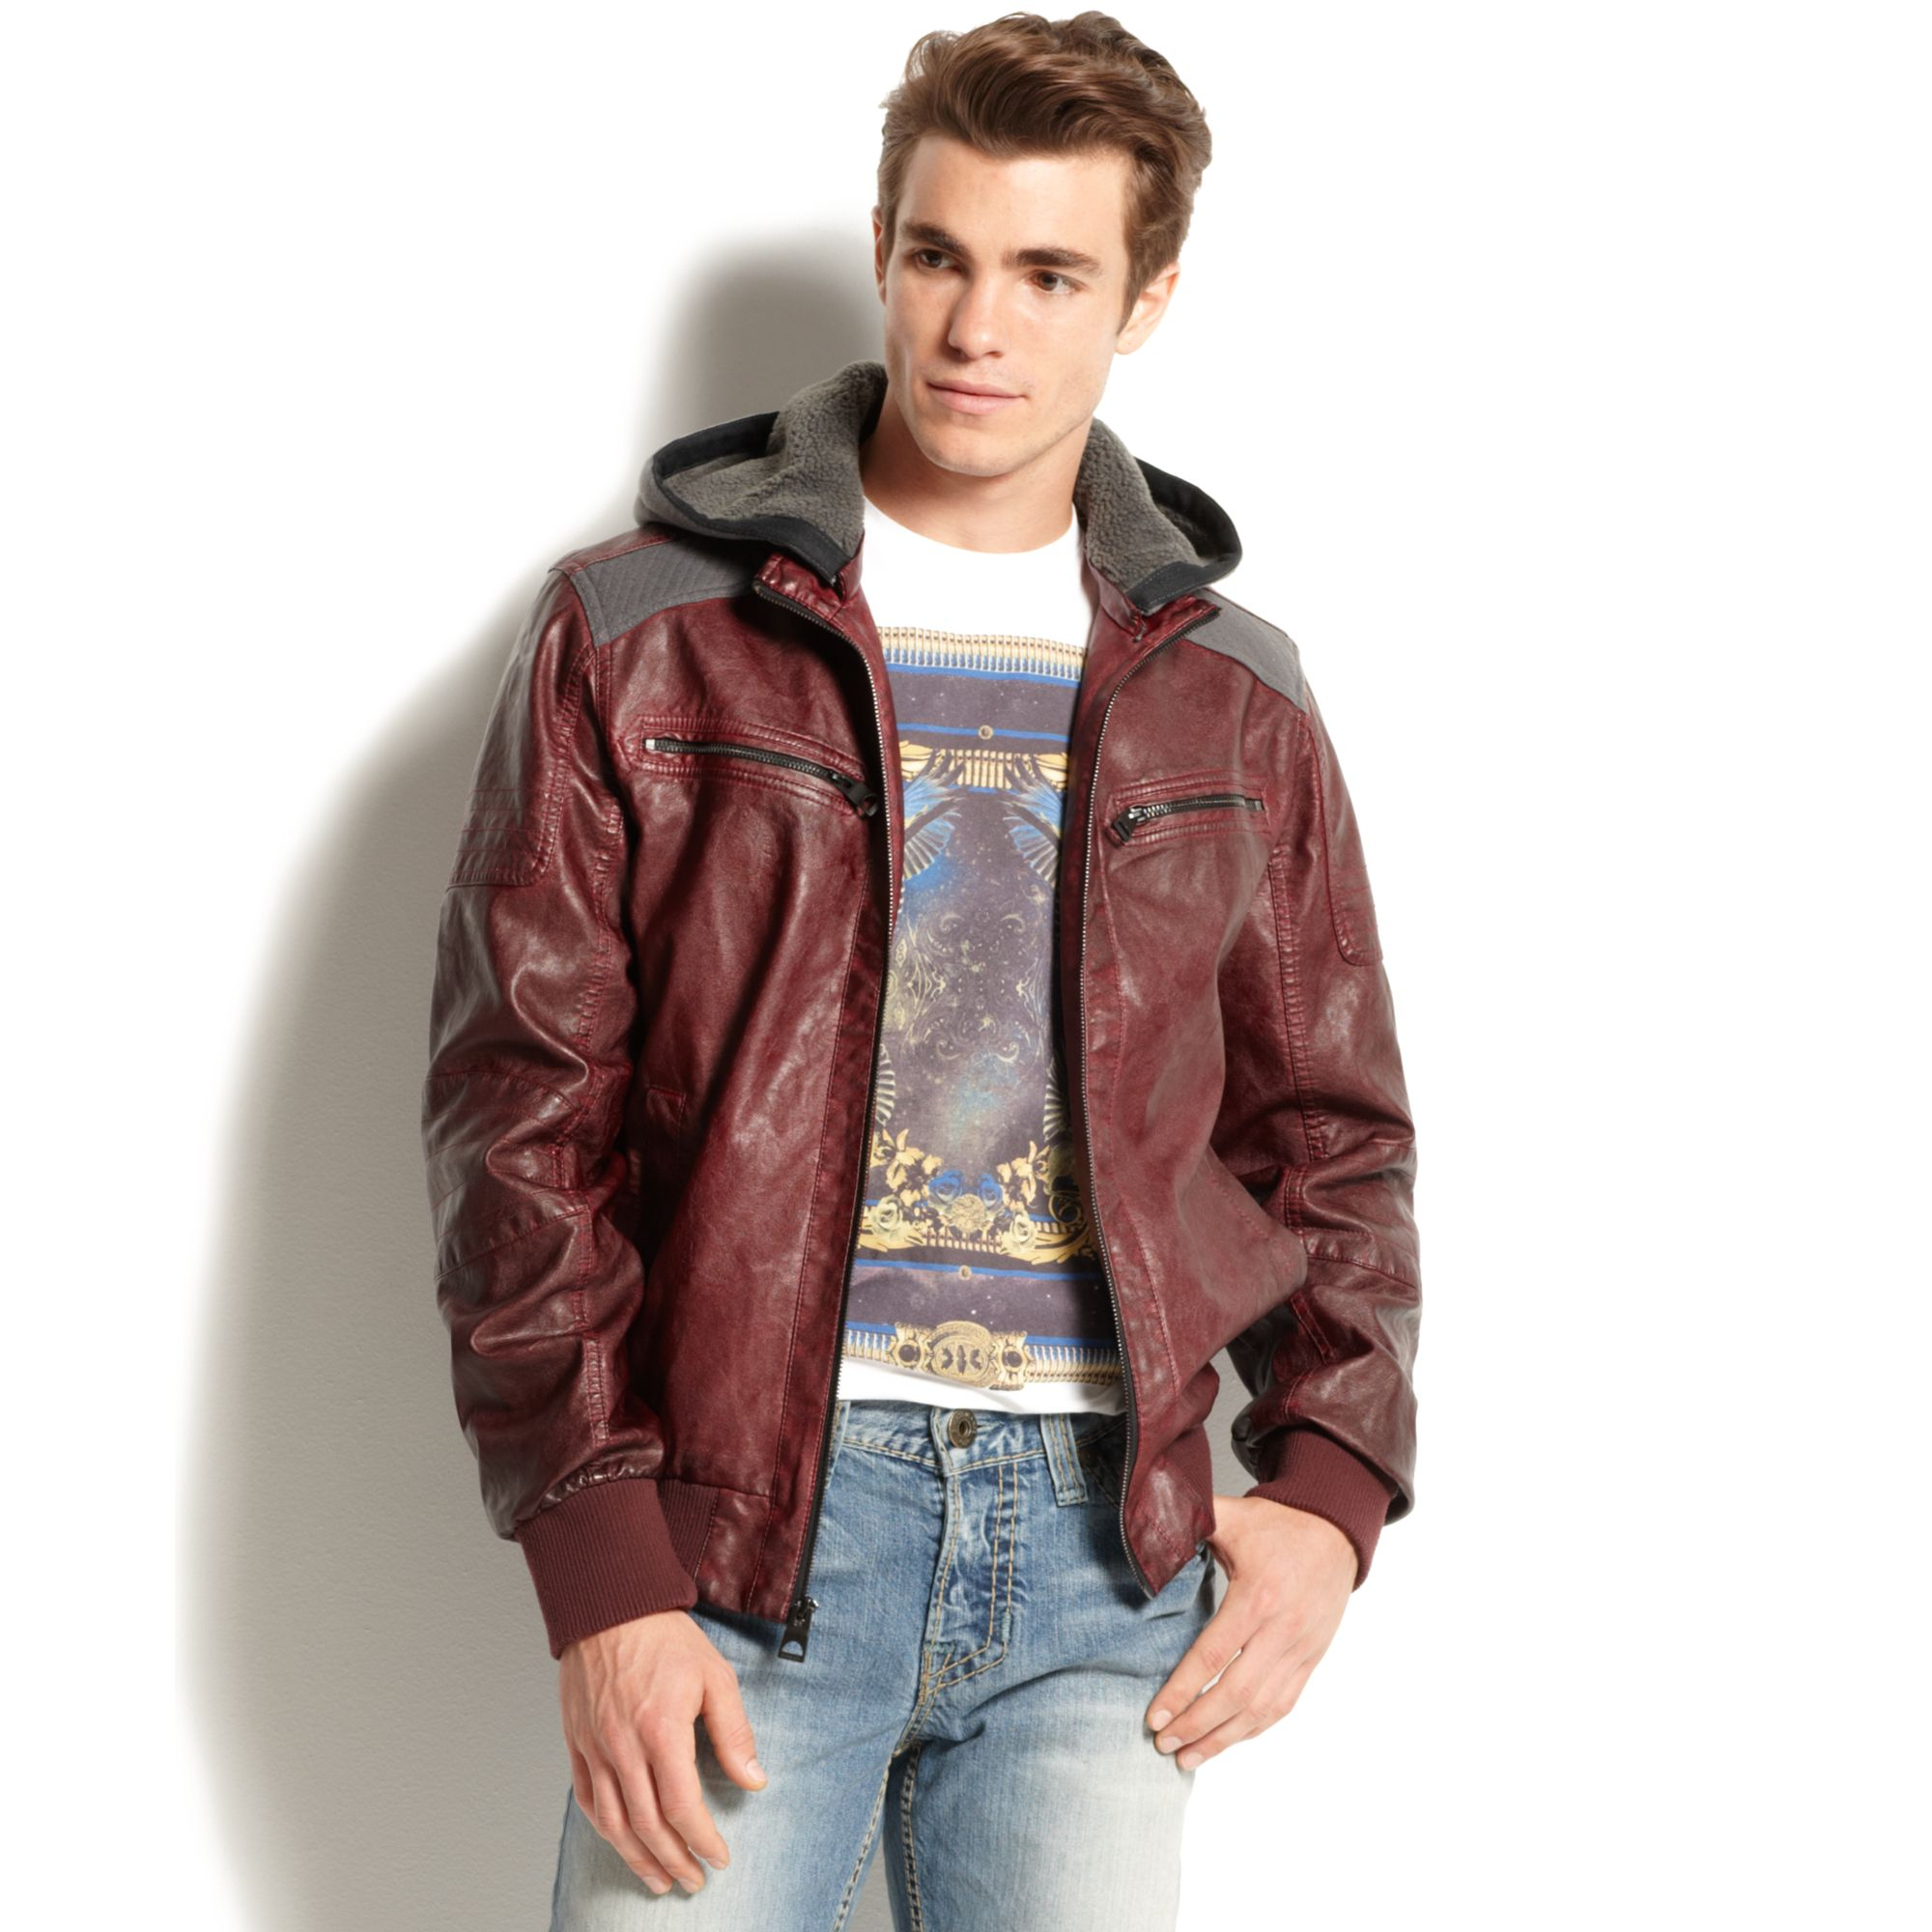 guess red jacket mens